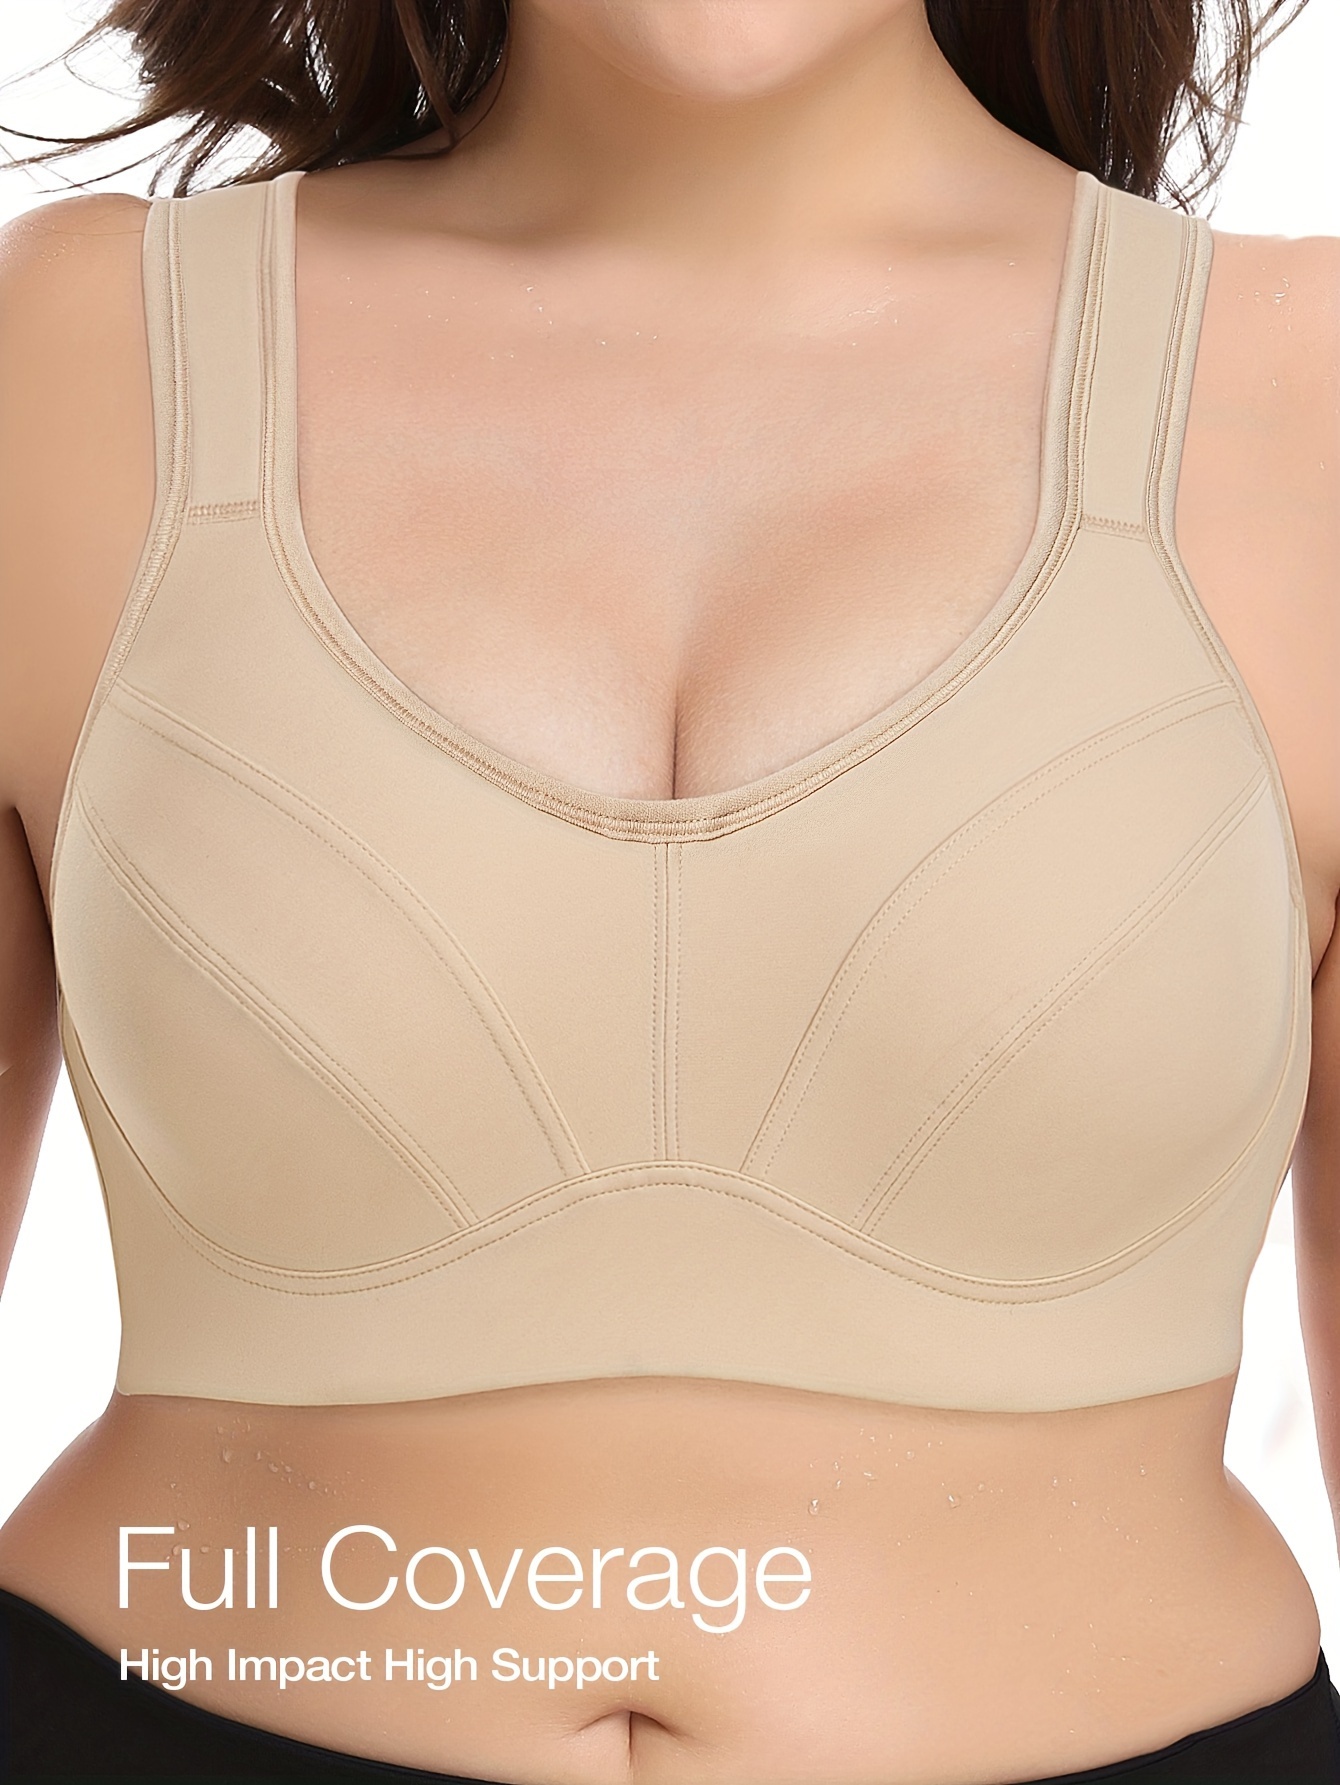 Comfortable and Supportive Women's Sports Bra